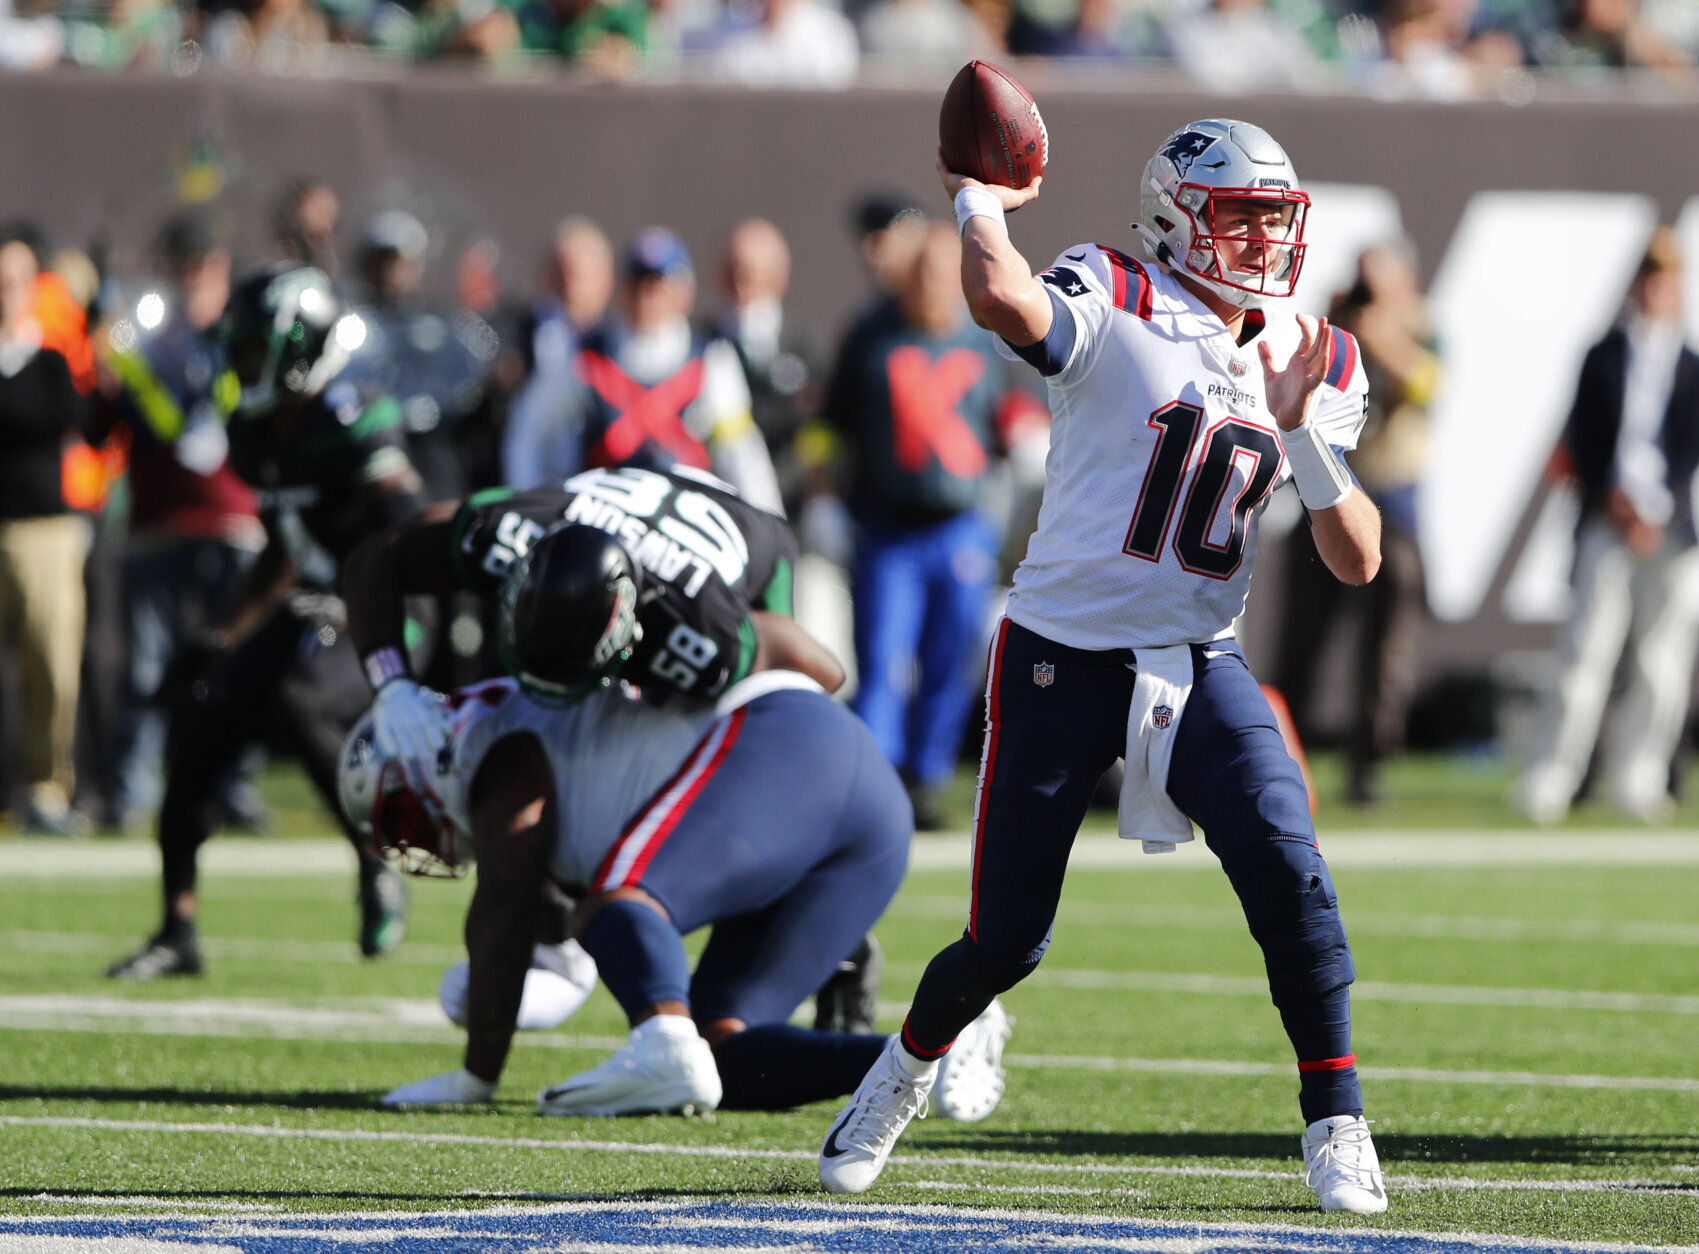 <p><b><i>Patriots 22</i></b><br />
<b><i>Jets 17</i></b></p>
<p>It&#8217;s a week later than expected, but <a href="https://twitter.com/ESPNStatsInfo/status/1586812654001201153?s=20&amp;t=1hV9LH-TkICsHjm2aPxK5g" target="_blank" rel="noopener">Bill Belichick got milestone career win No. 325</a> thanks to New England&#8217;s 13th straight victory over the New York Jets. As surprisingly good as Gang Green has been (this was the first time in 21 years they entered this matchup as the better team!), their 1-3 home record leads me to believe that <a href="https://www.youtube.com/watch?v=kw5UWqpcsDs" target="_blank" rel="noopener">they are who we thought they were</a>.</p>
